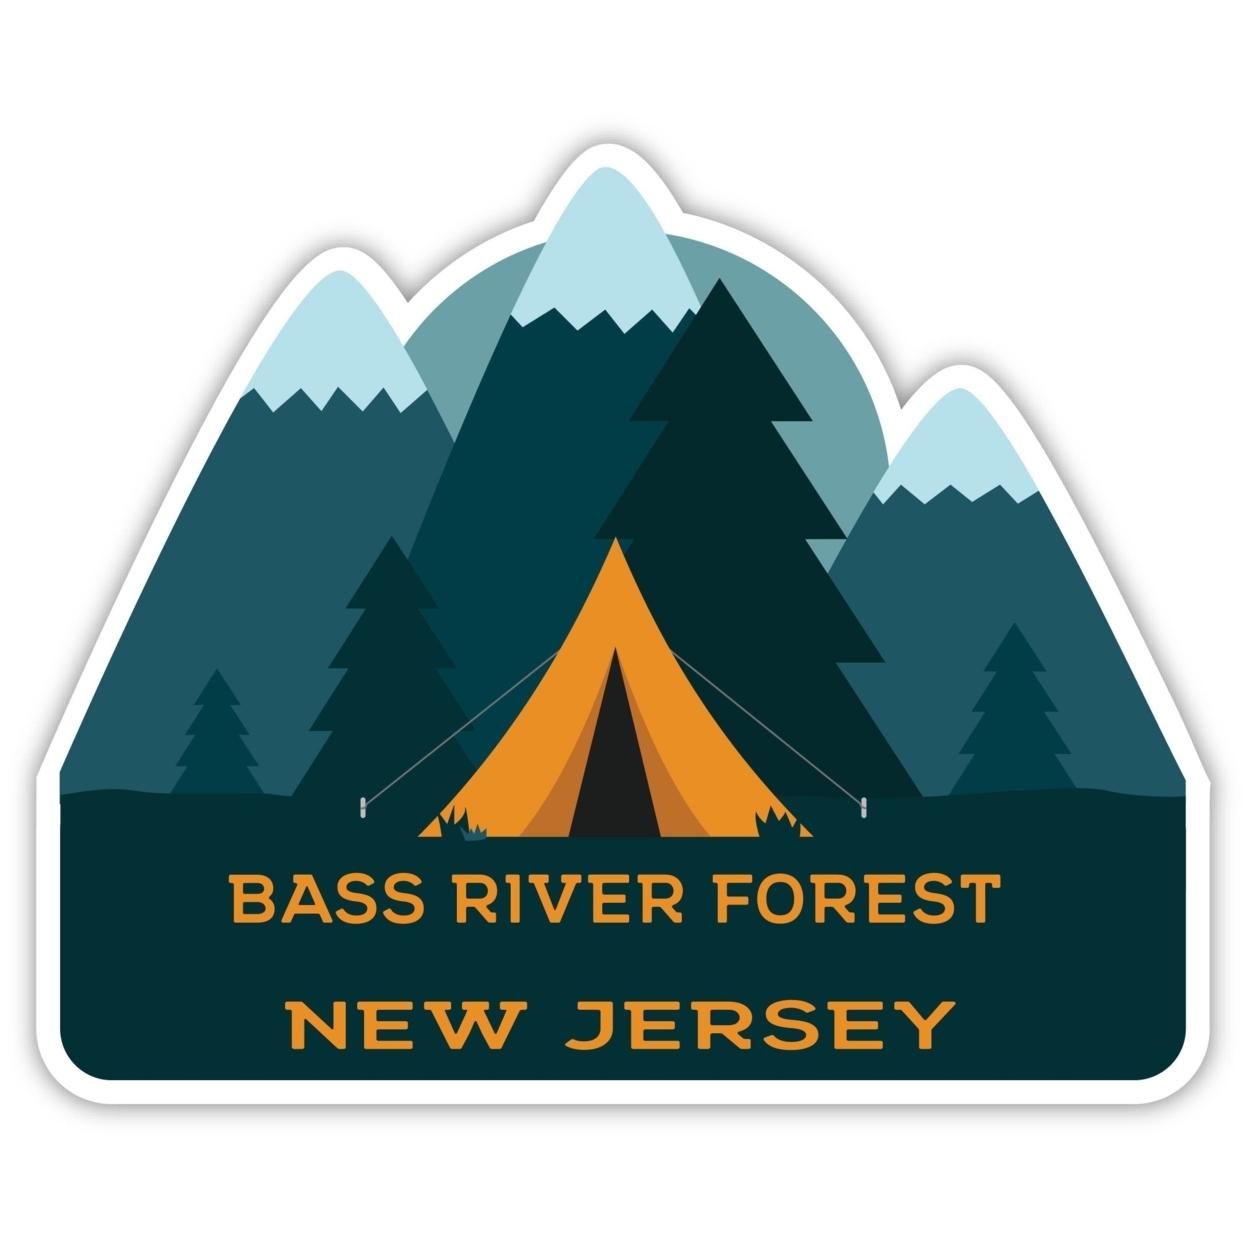 Bass River Forest New Jersey Souvenir Decorative Stickers (Choose Theme And Size) - Single Unit, 2-Inch, Tent